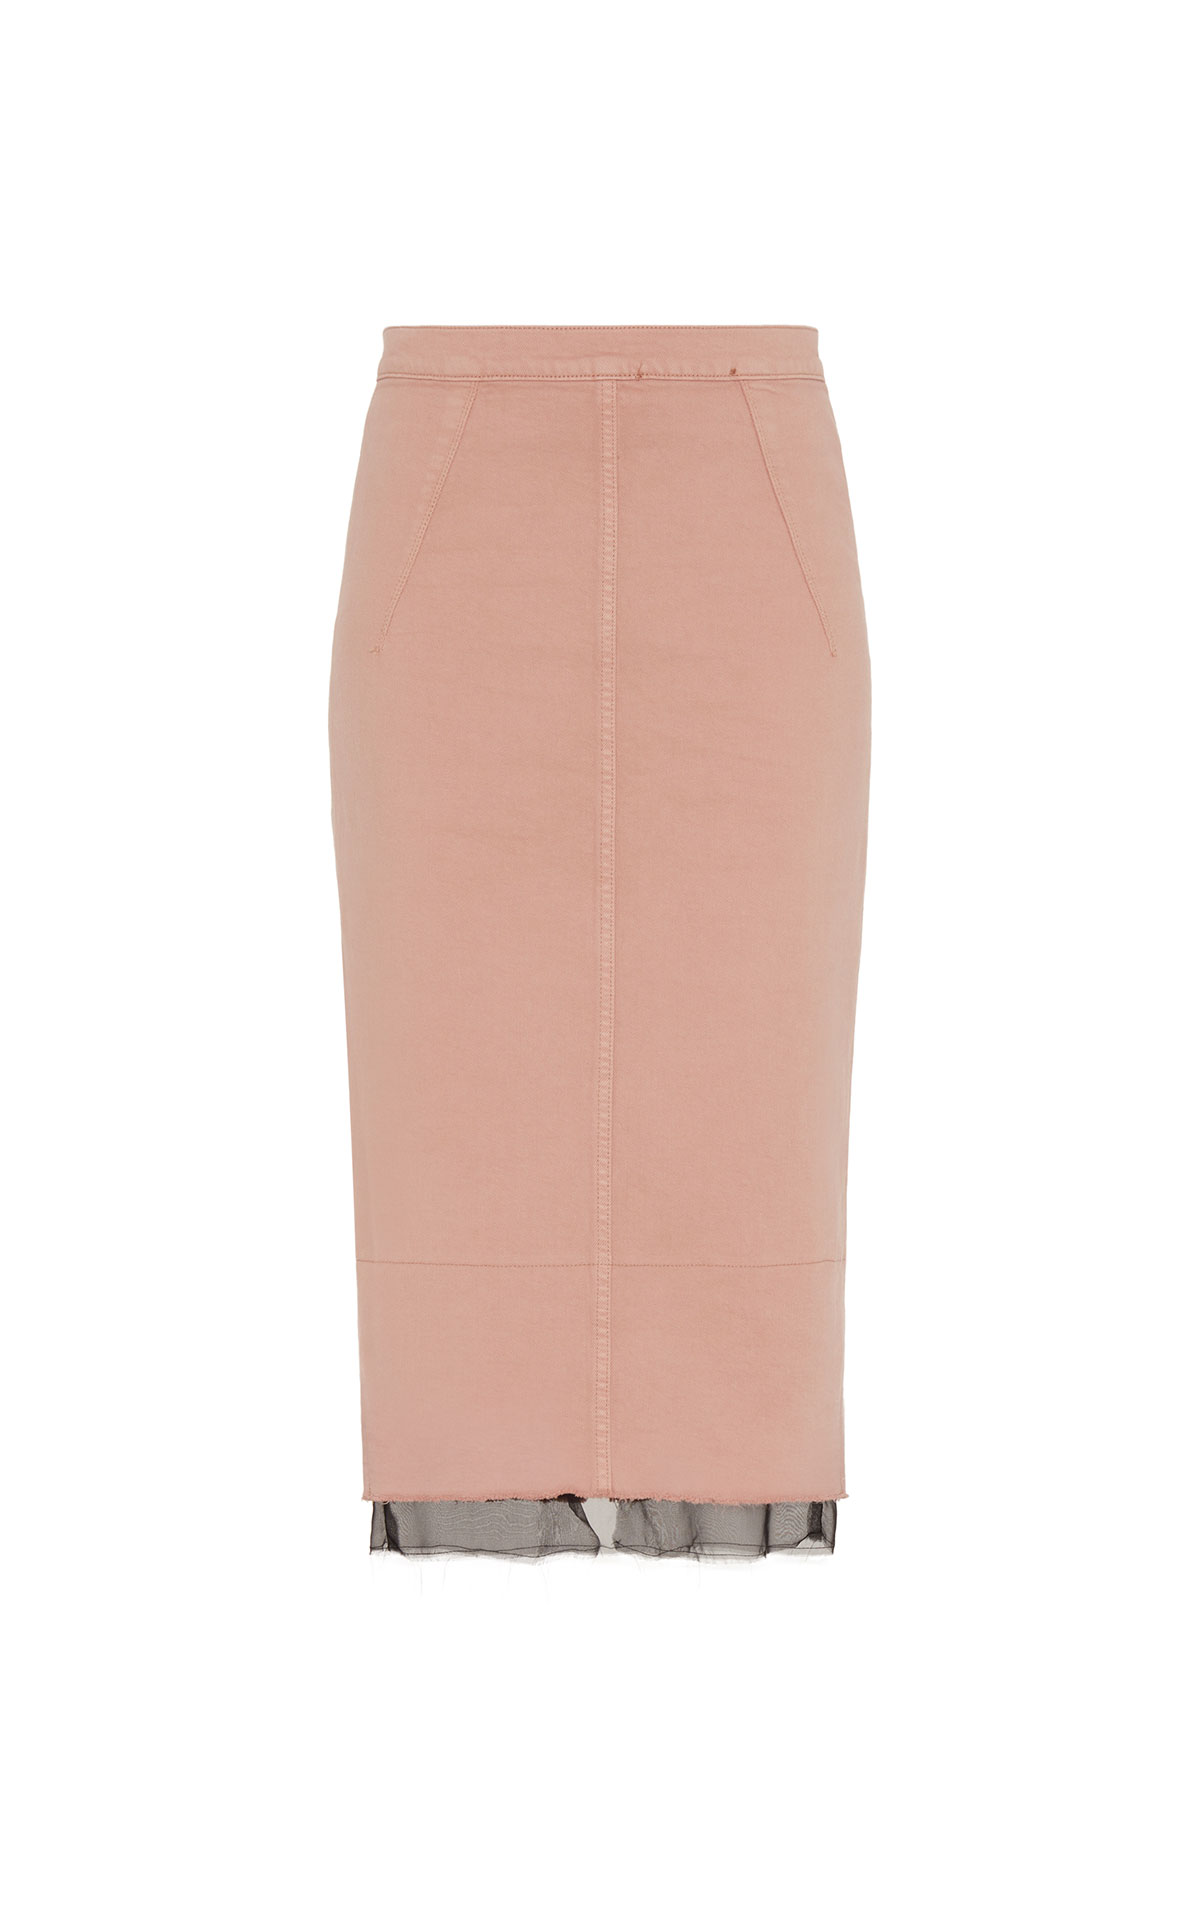 7 For All Mankind Pencil skirt cipria with chiffon from Bicester Village